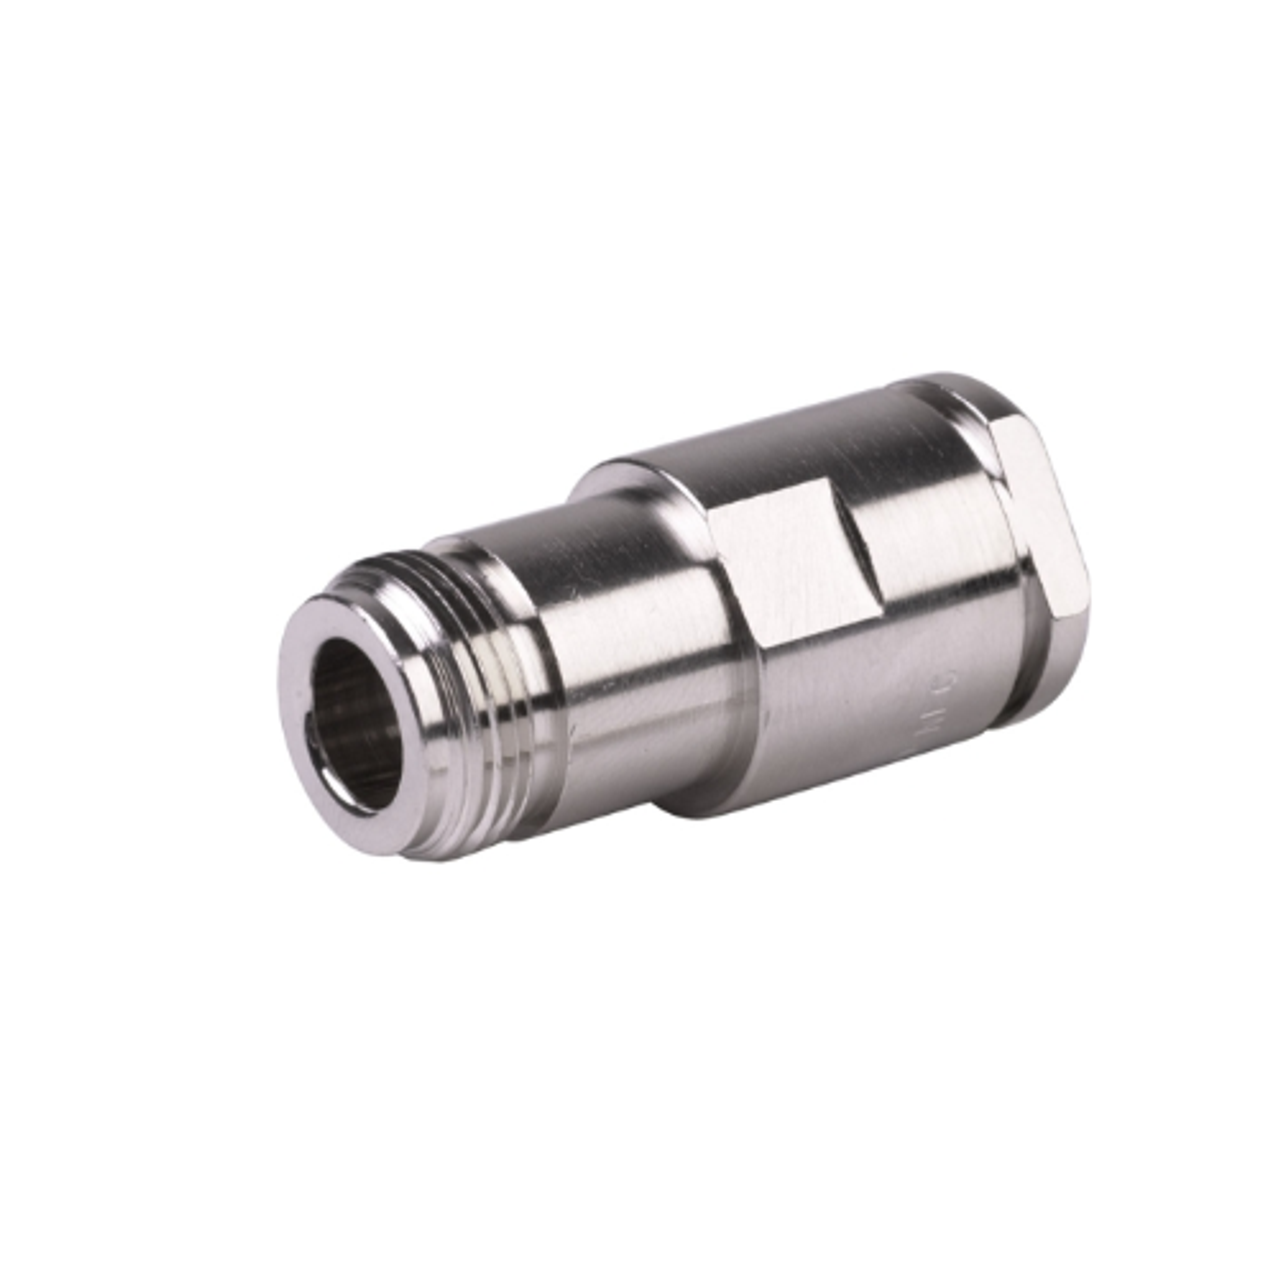 N-Female Crimp for 400-Series Coaxial Cable Rfwel Engr E-Store